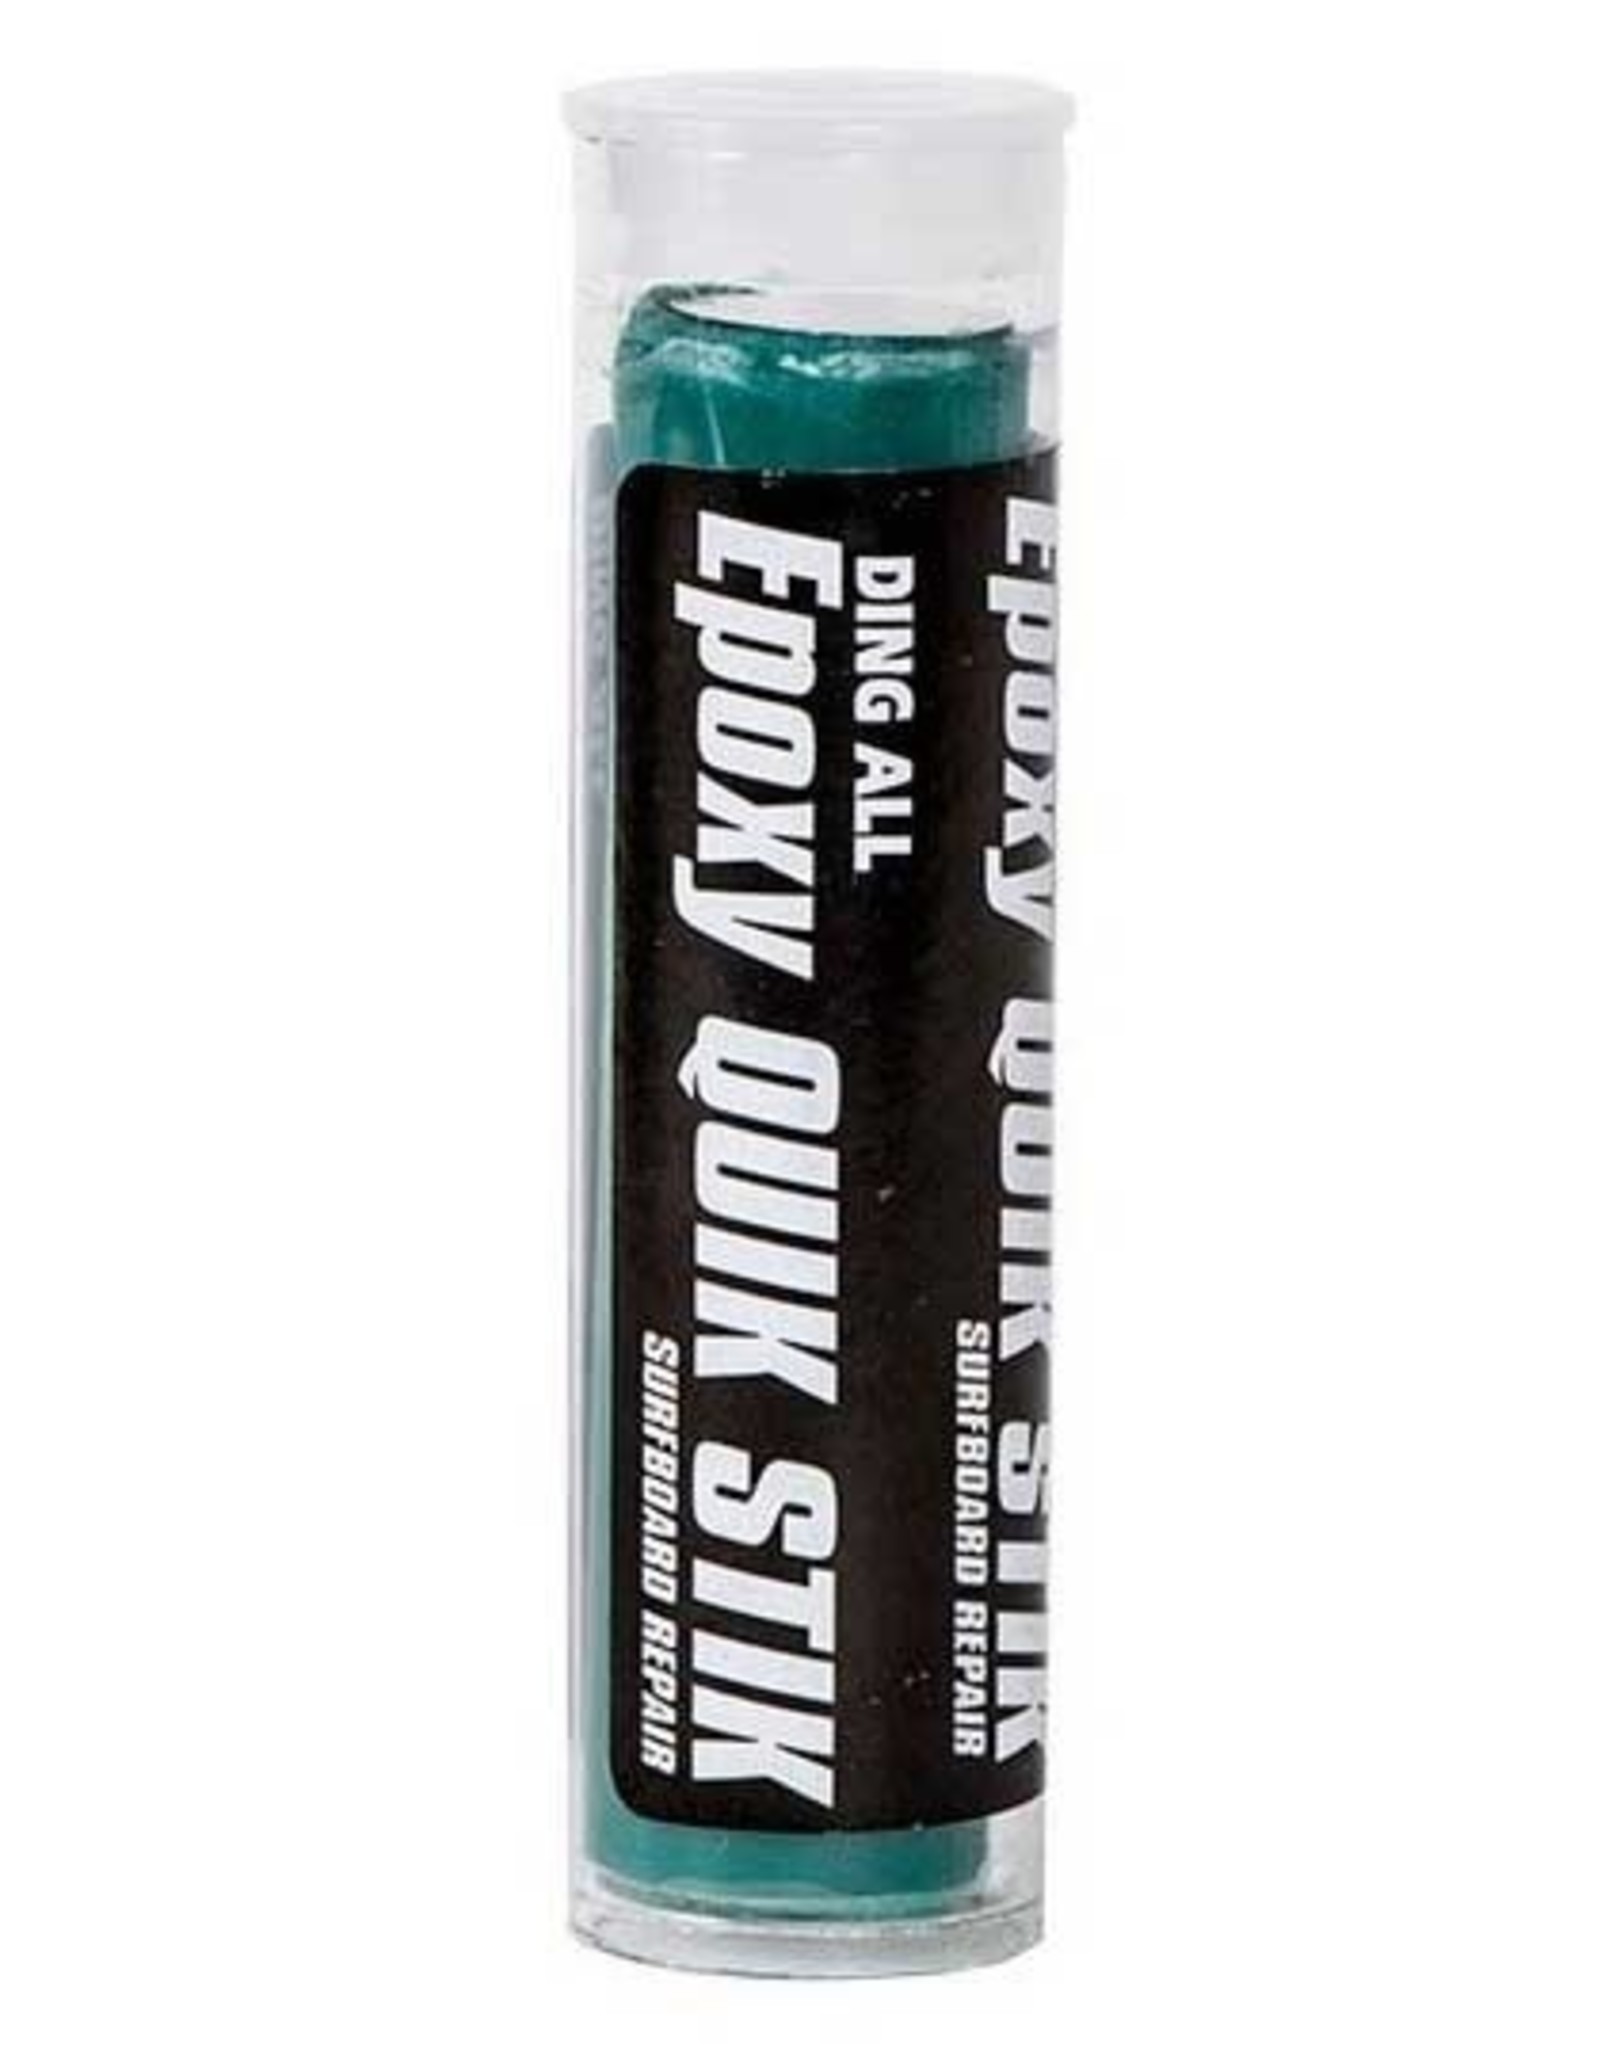 Ding All Ding All Epoxy Quik Stik Surfboard Repair Tube